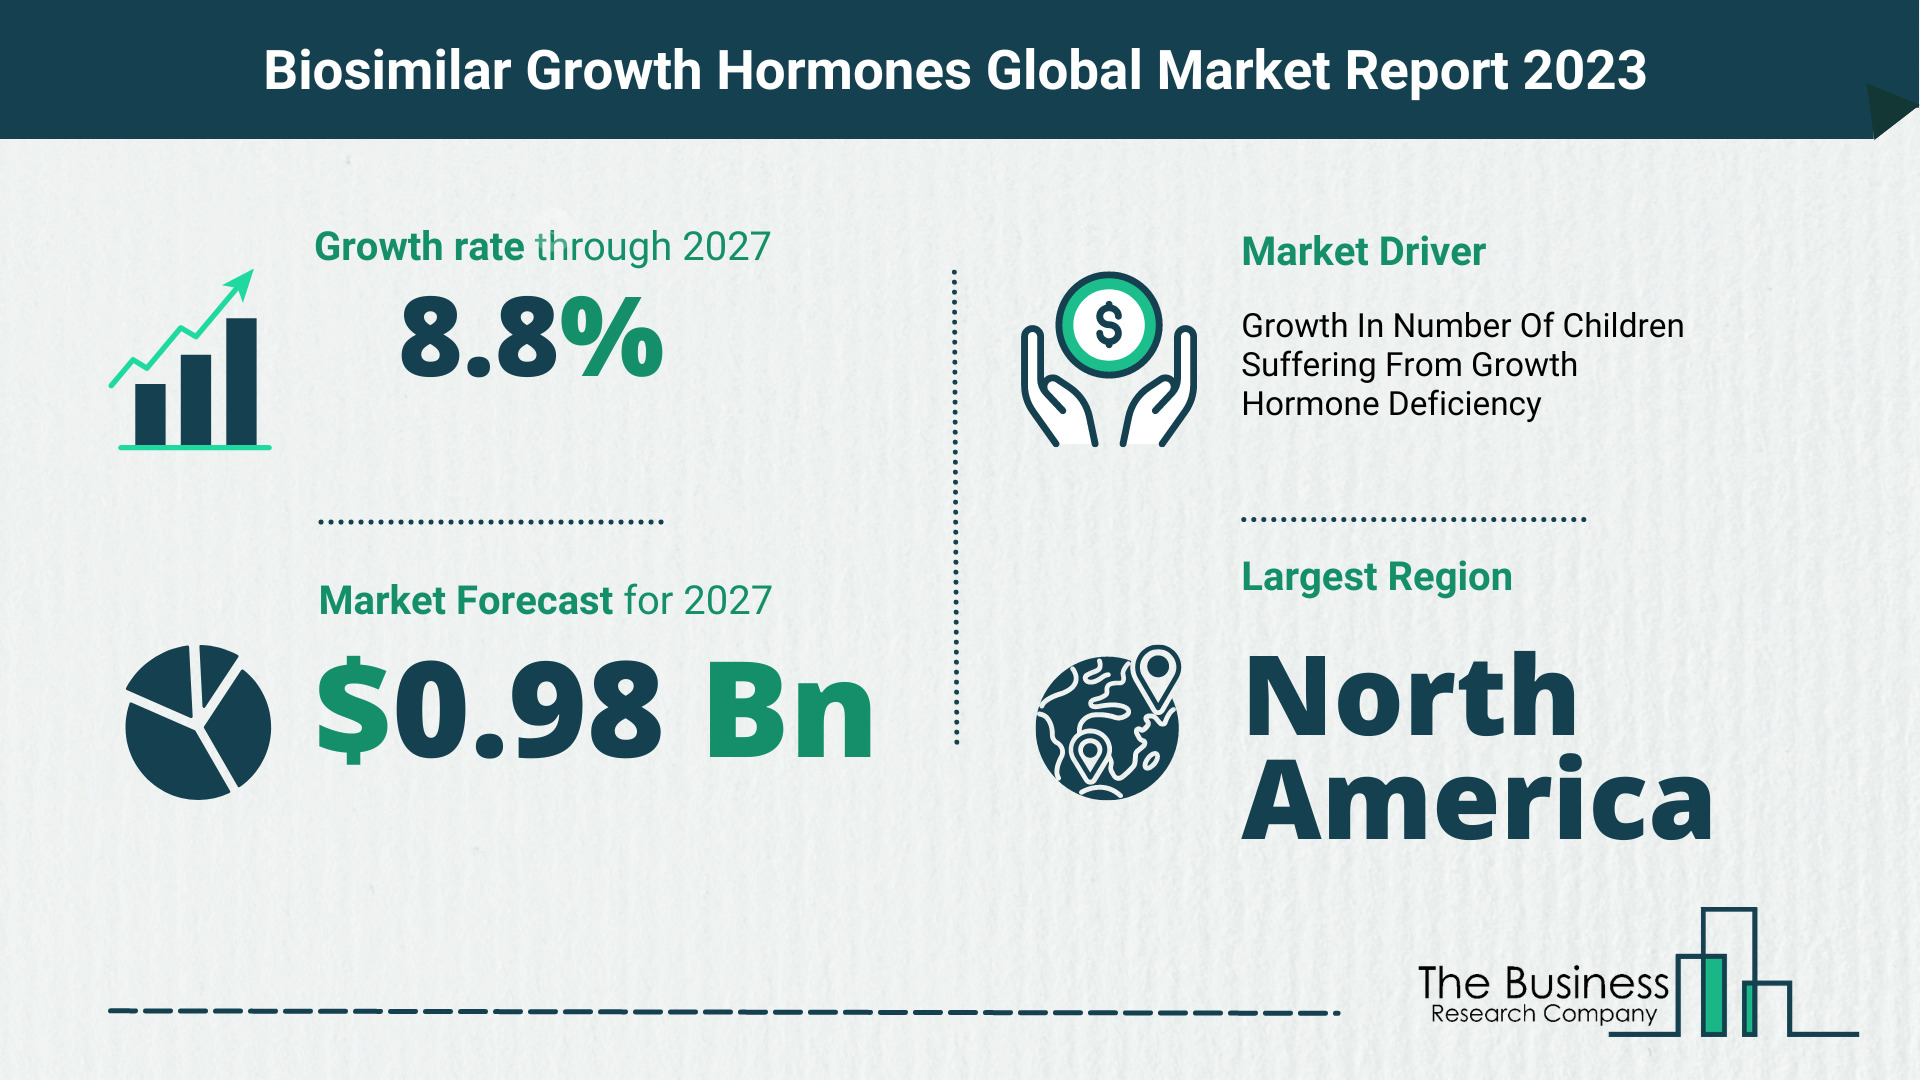 What Will The Biosimilar Growth Hormones Market Look Like In 2023?